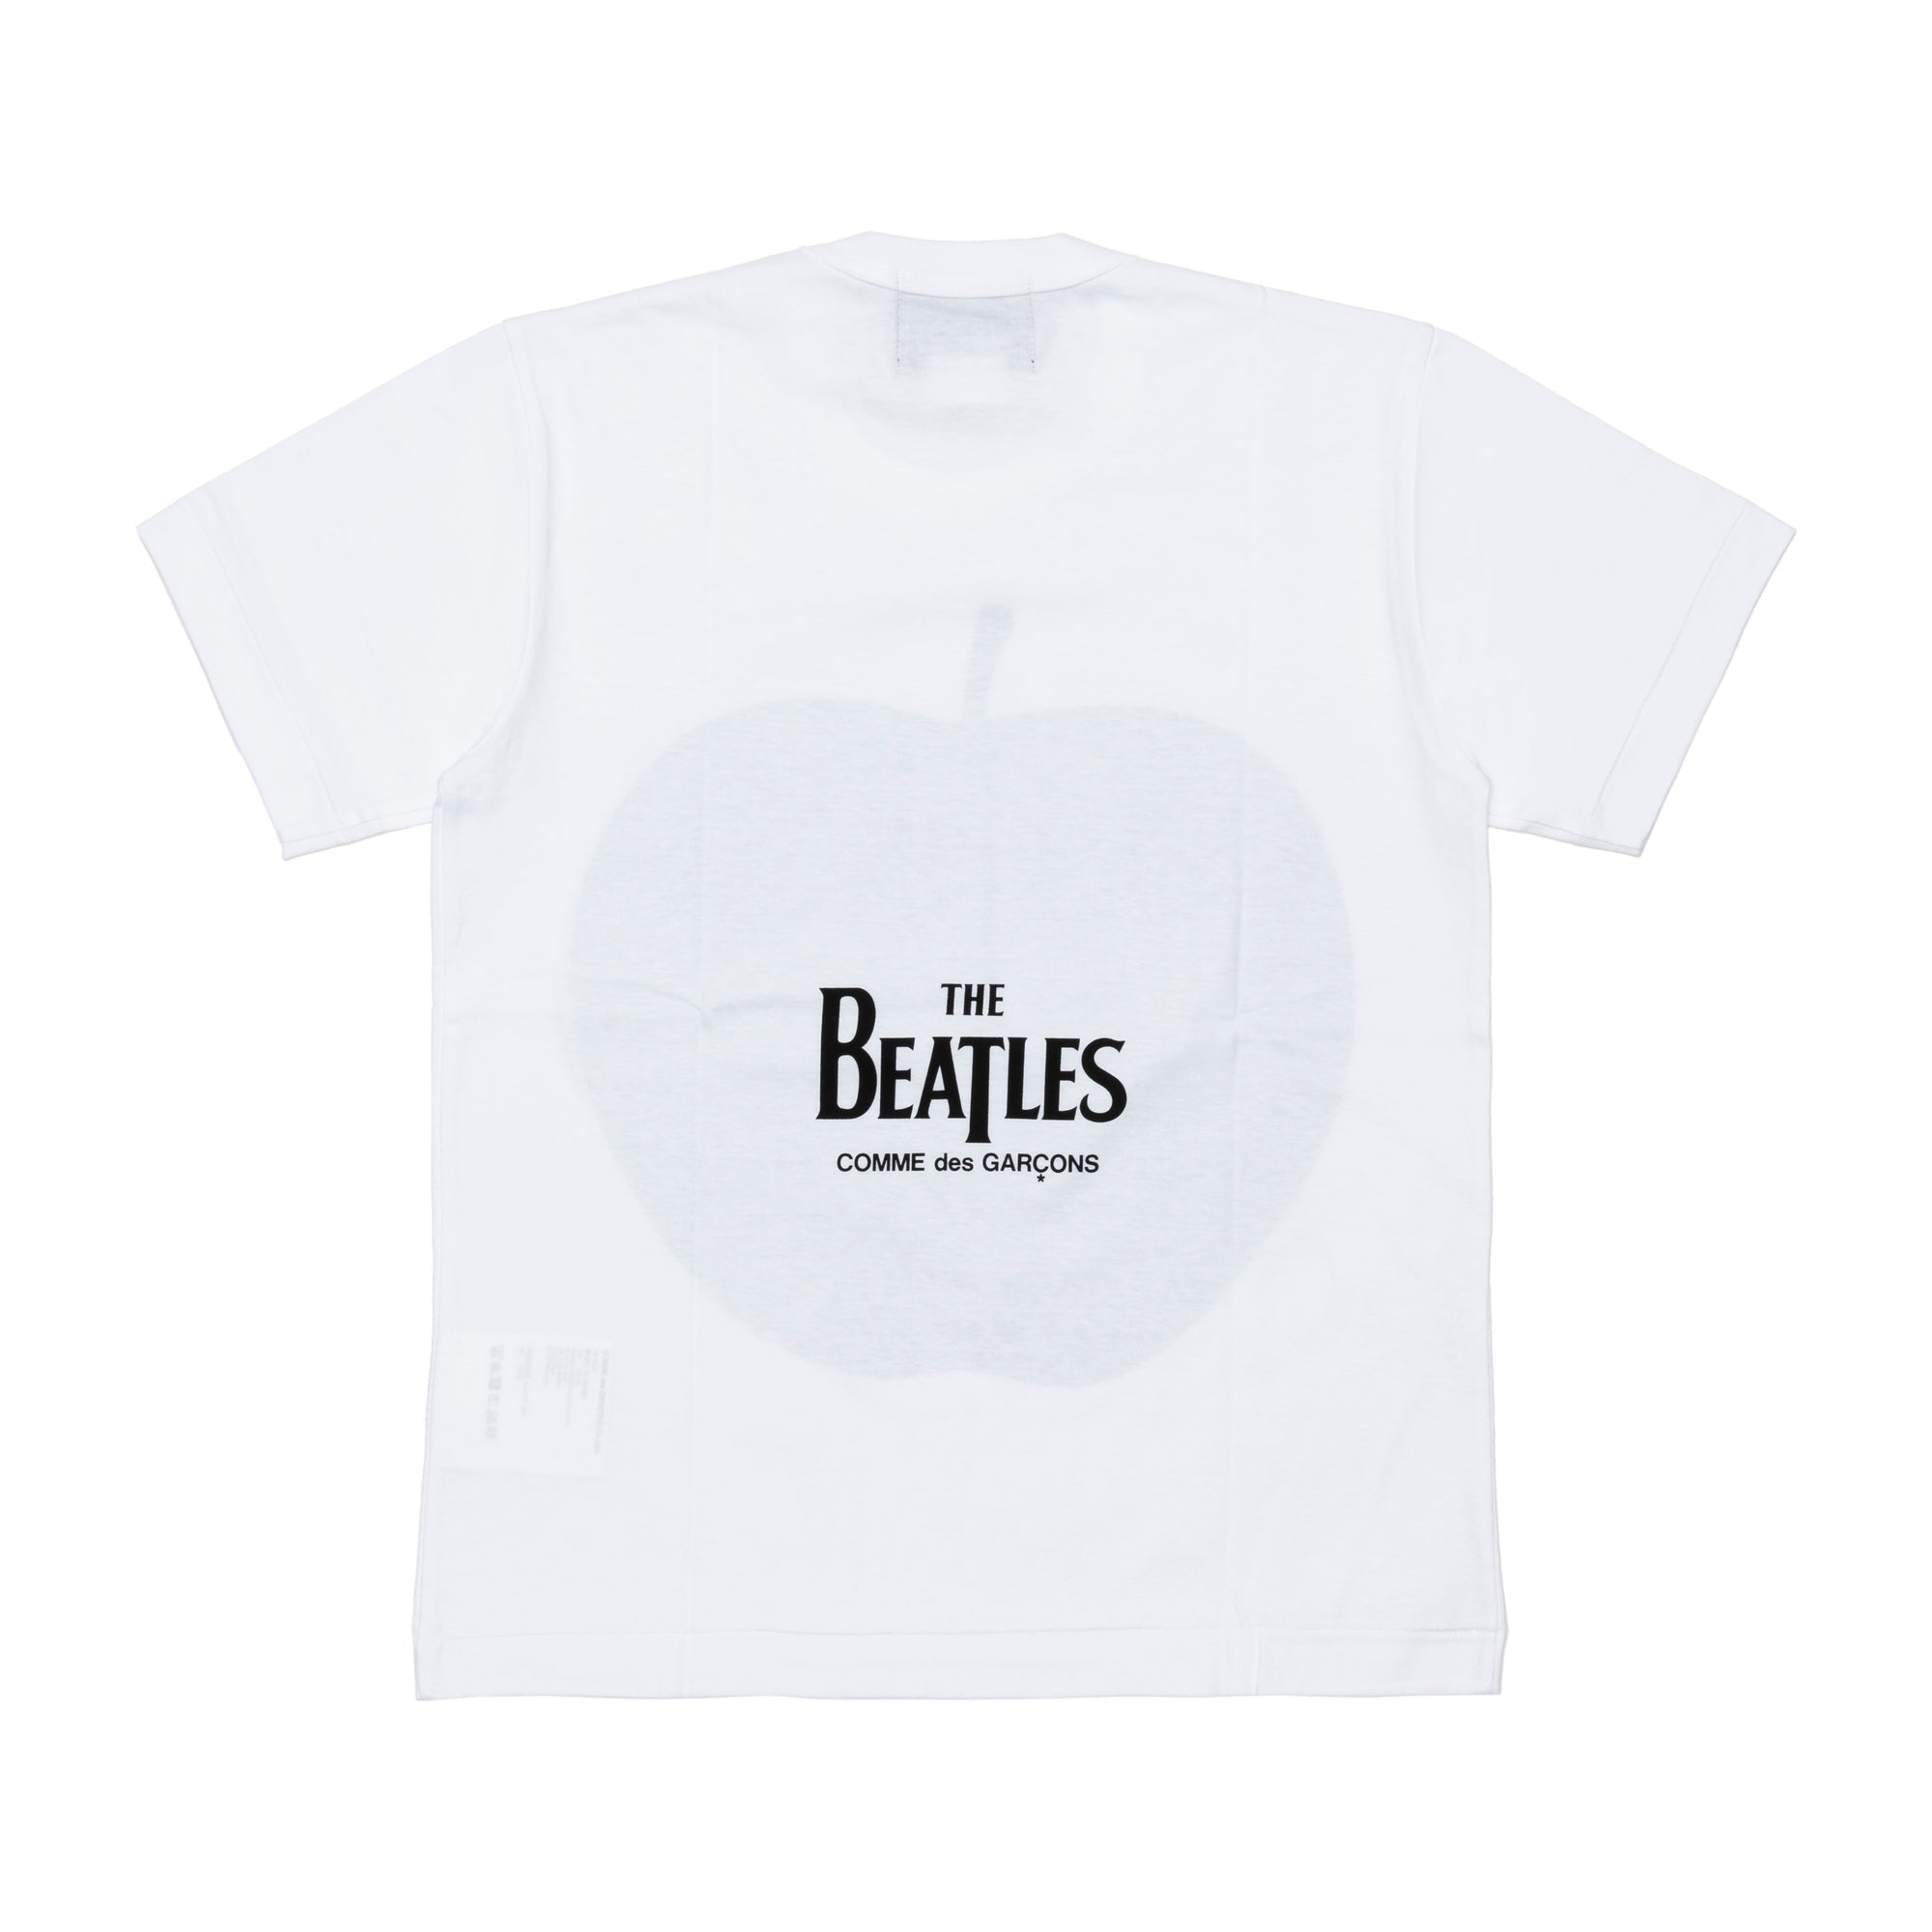 The Beatles CDG - Big apple Cotton S/S Tee - (White) view 2